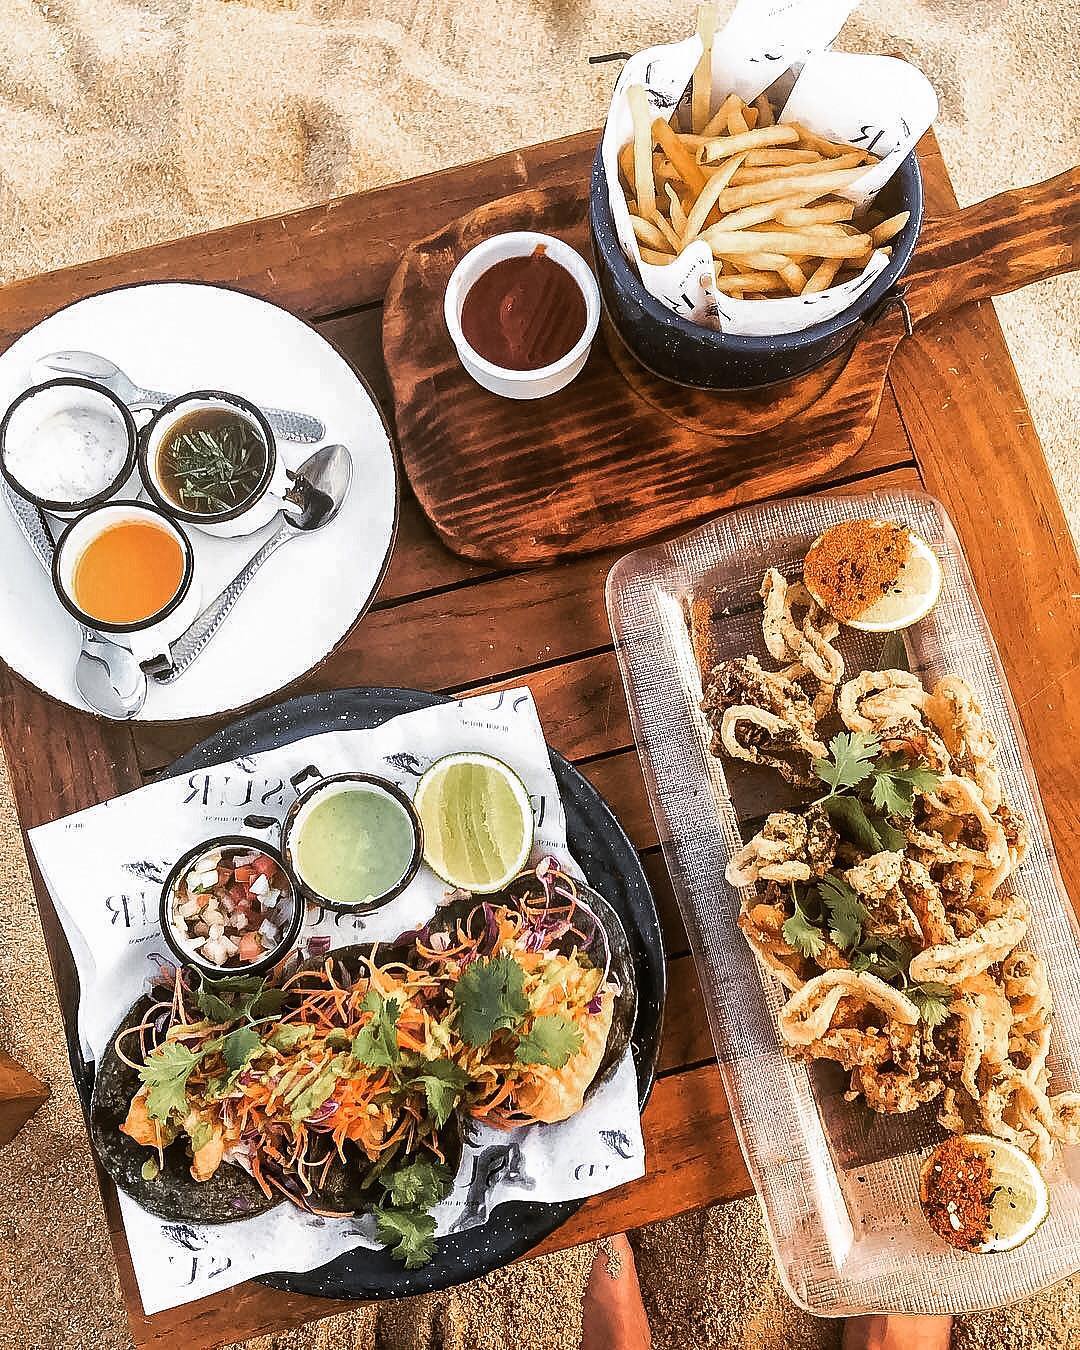 Plates of food on a board surrounded by San